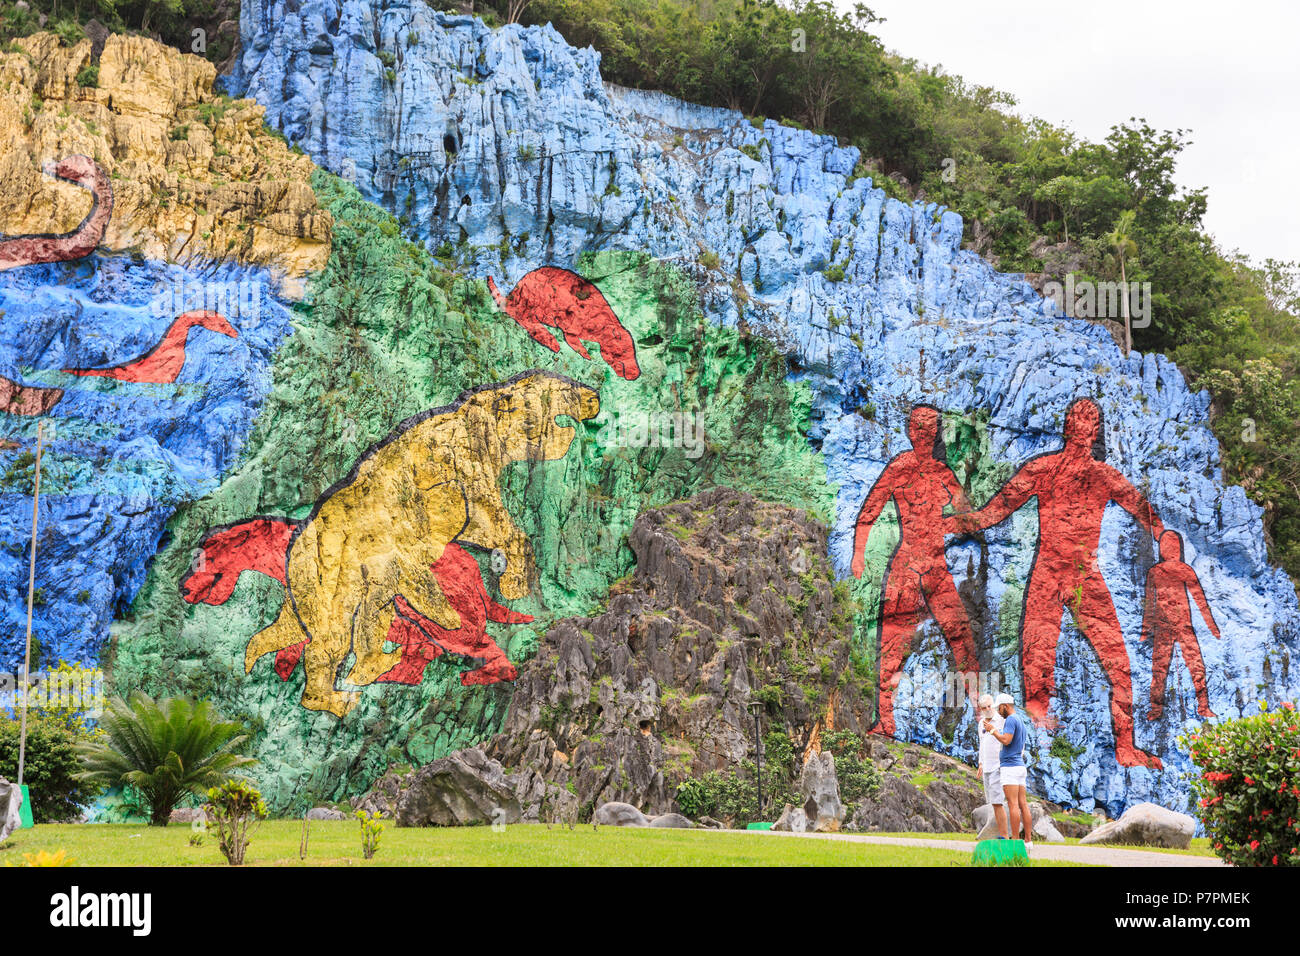 Tourist attraction, giant stone wall painting made to look like a prehistoric work, in Parque Nacional Viñales, Sierra de Viñales, Cuba Stock Photo